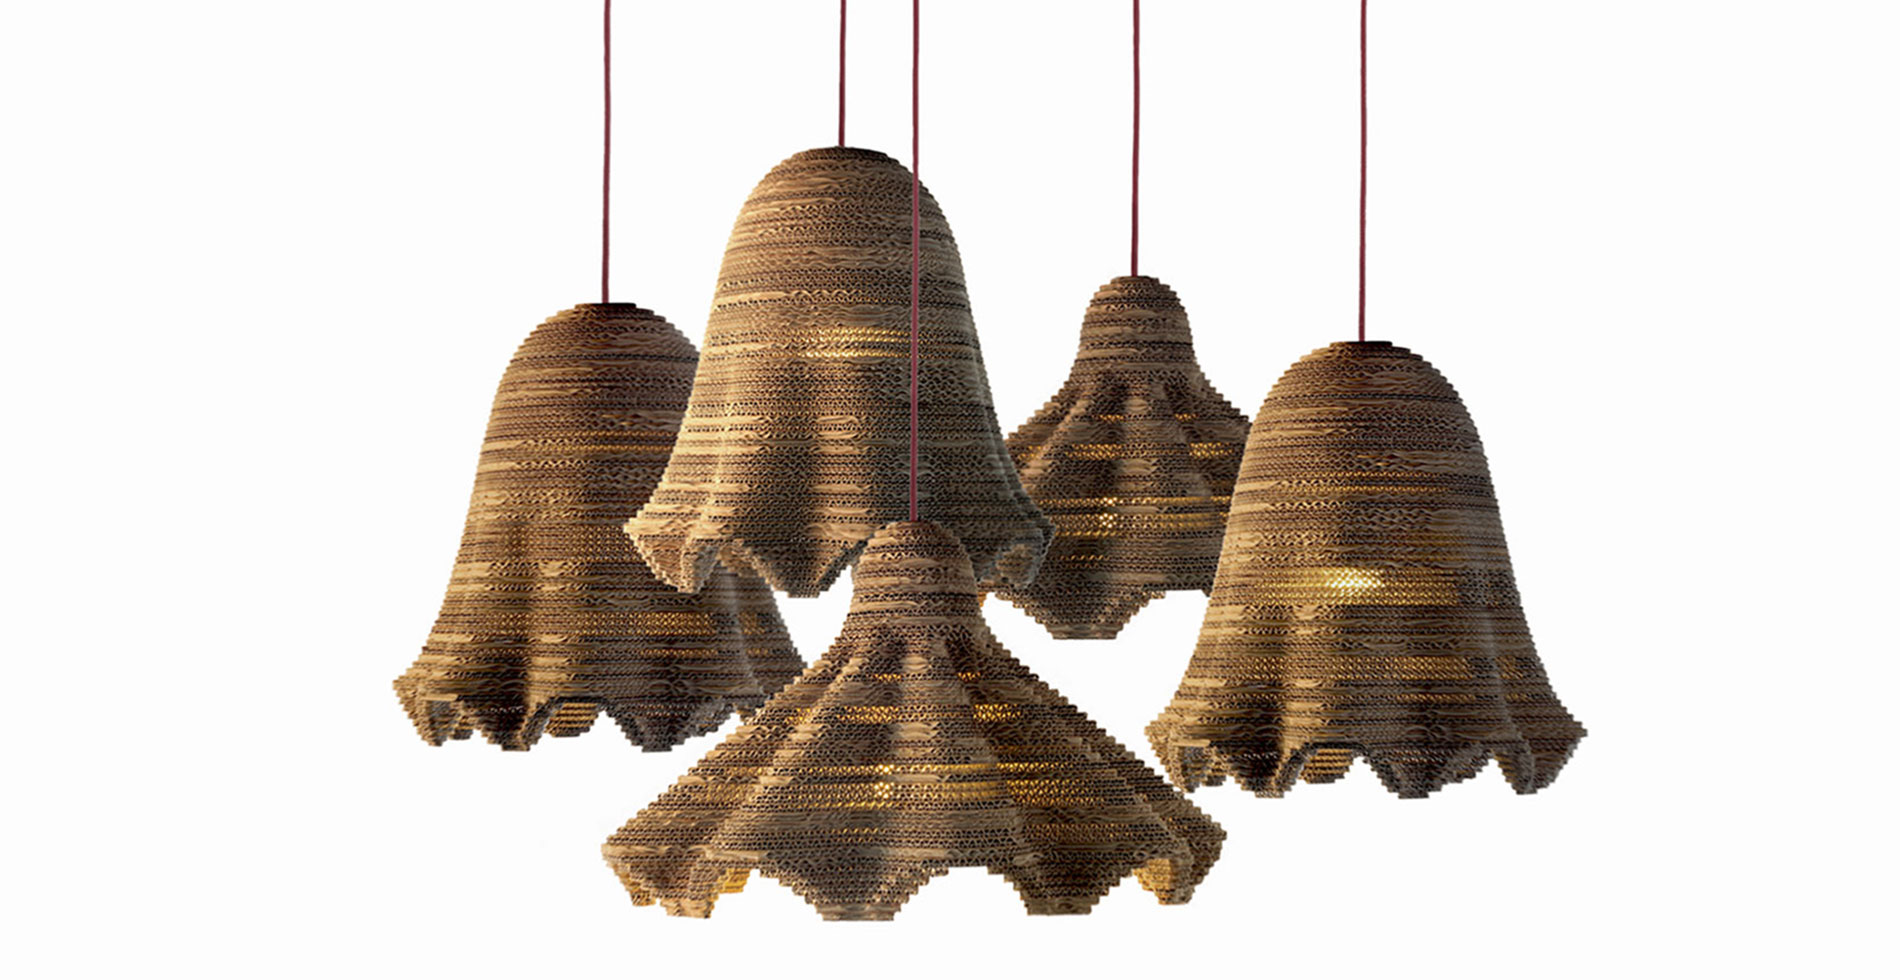 Italiana lamps made of recycled cardboard | Sustainable design by Antonio Pascale for eetico - Made in Italy